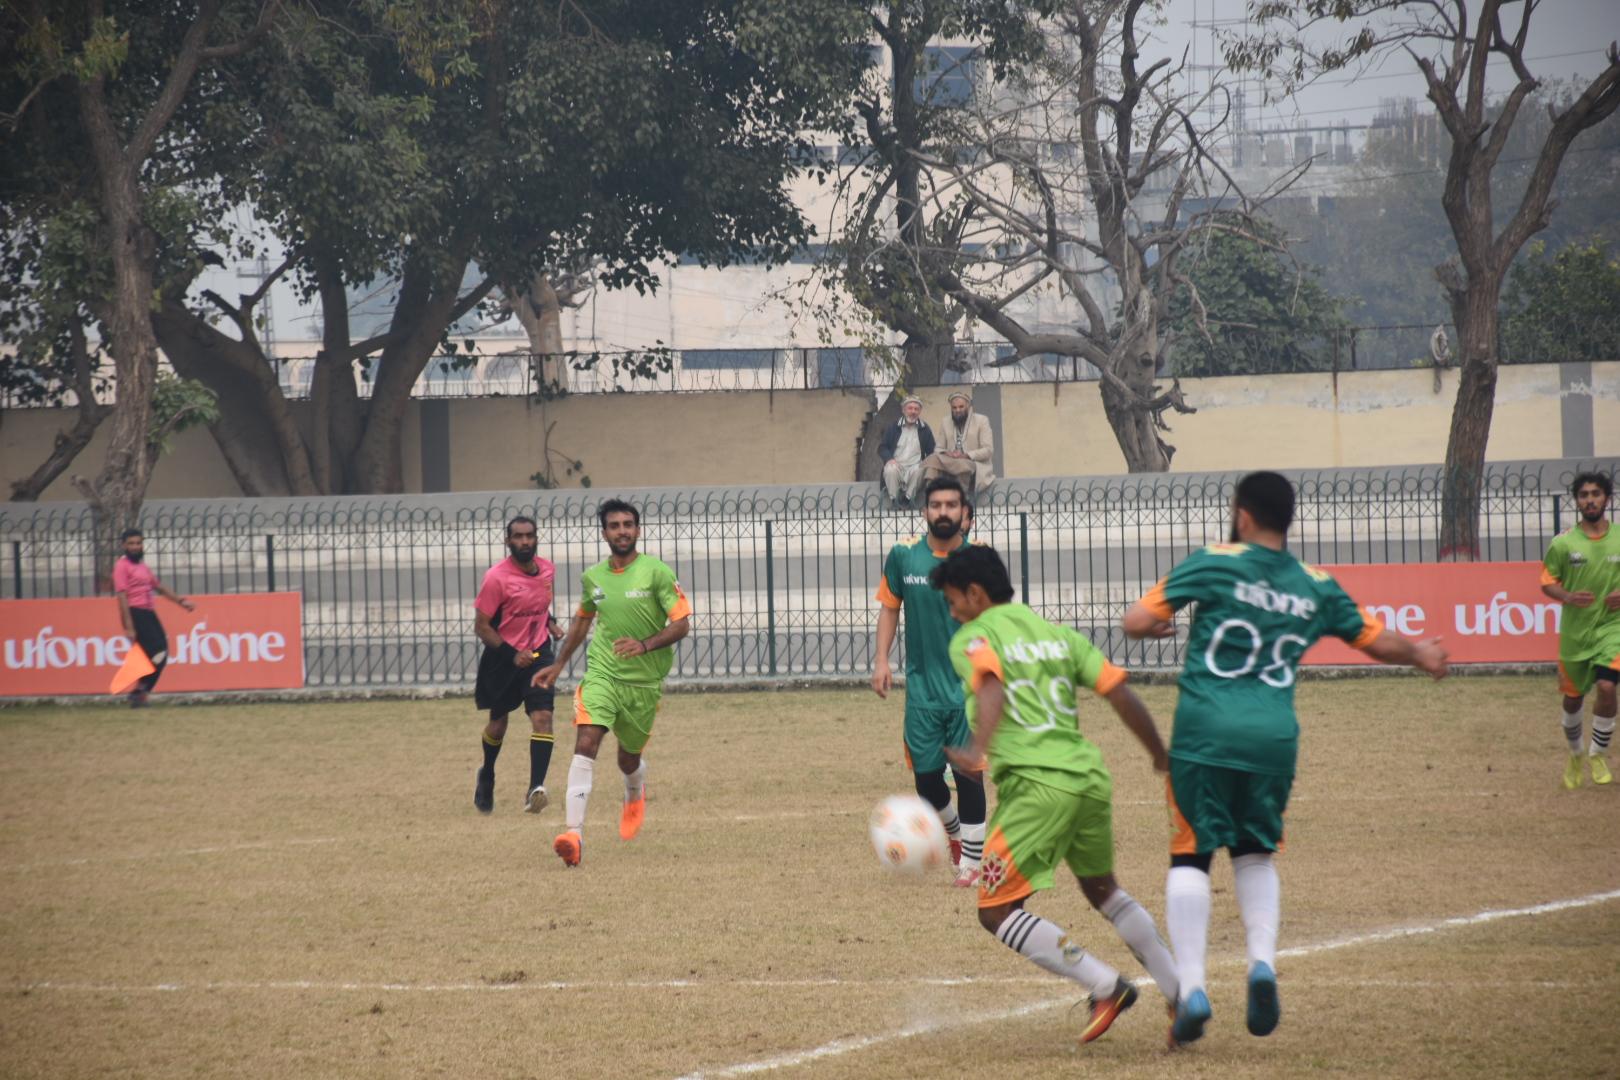 Ufone Khyber Pakhtunkhwa Football Cup: Super8 conclude as the championship enter final leg